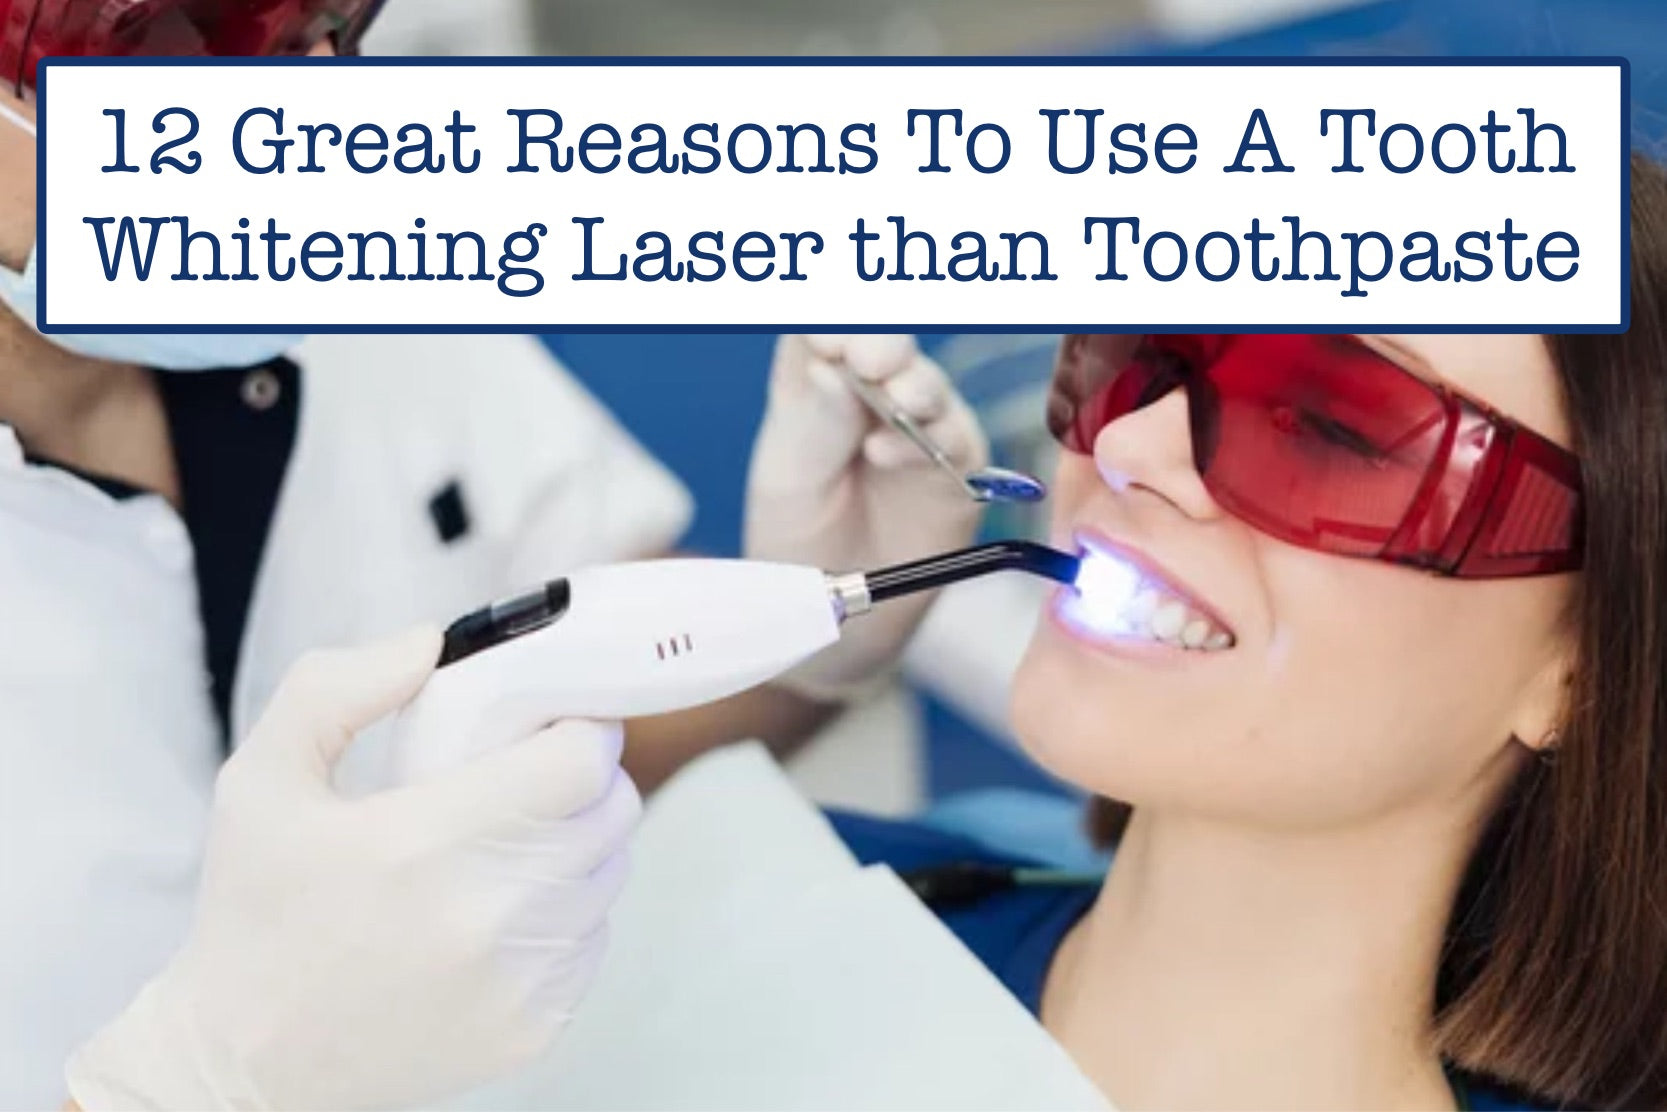 12 Great Reasons To Use A Tooth Whitening Laser than Toothpaste